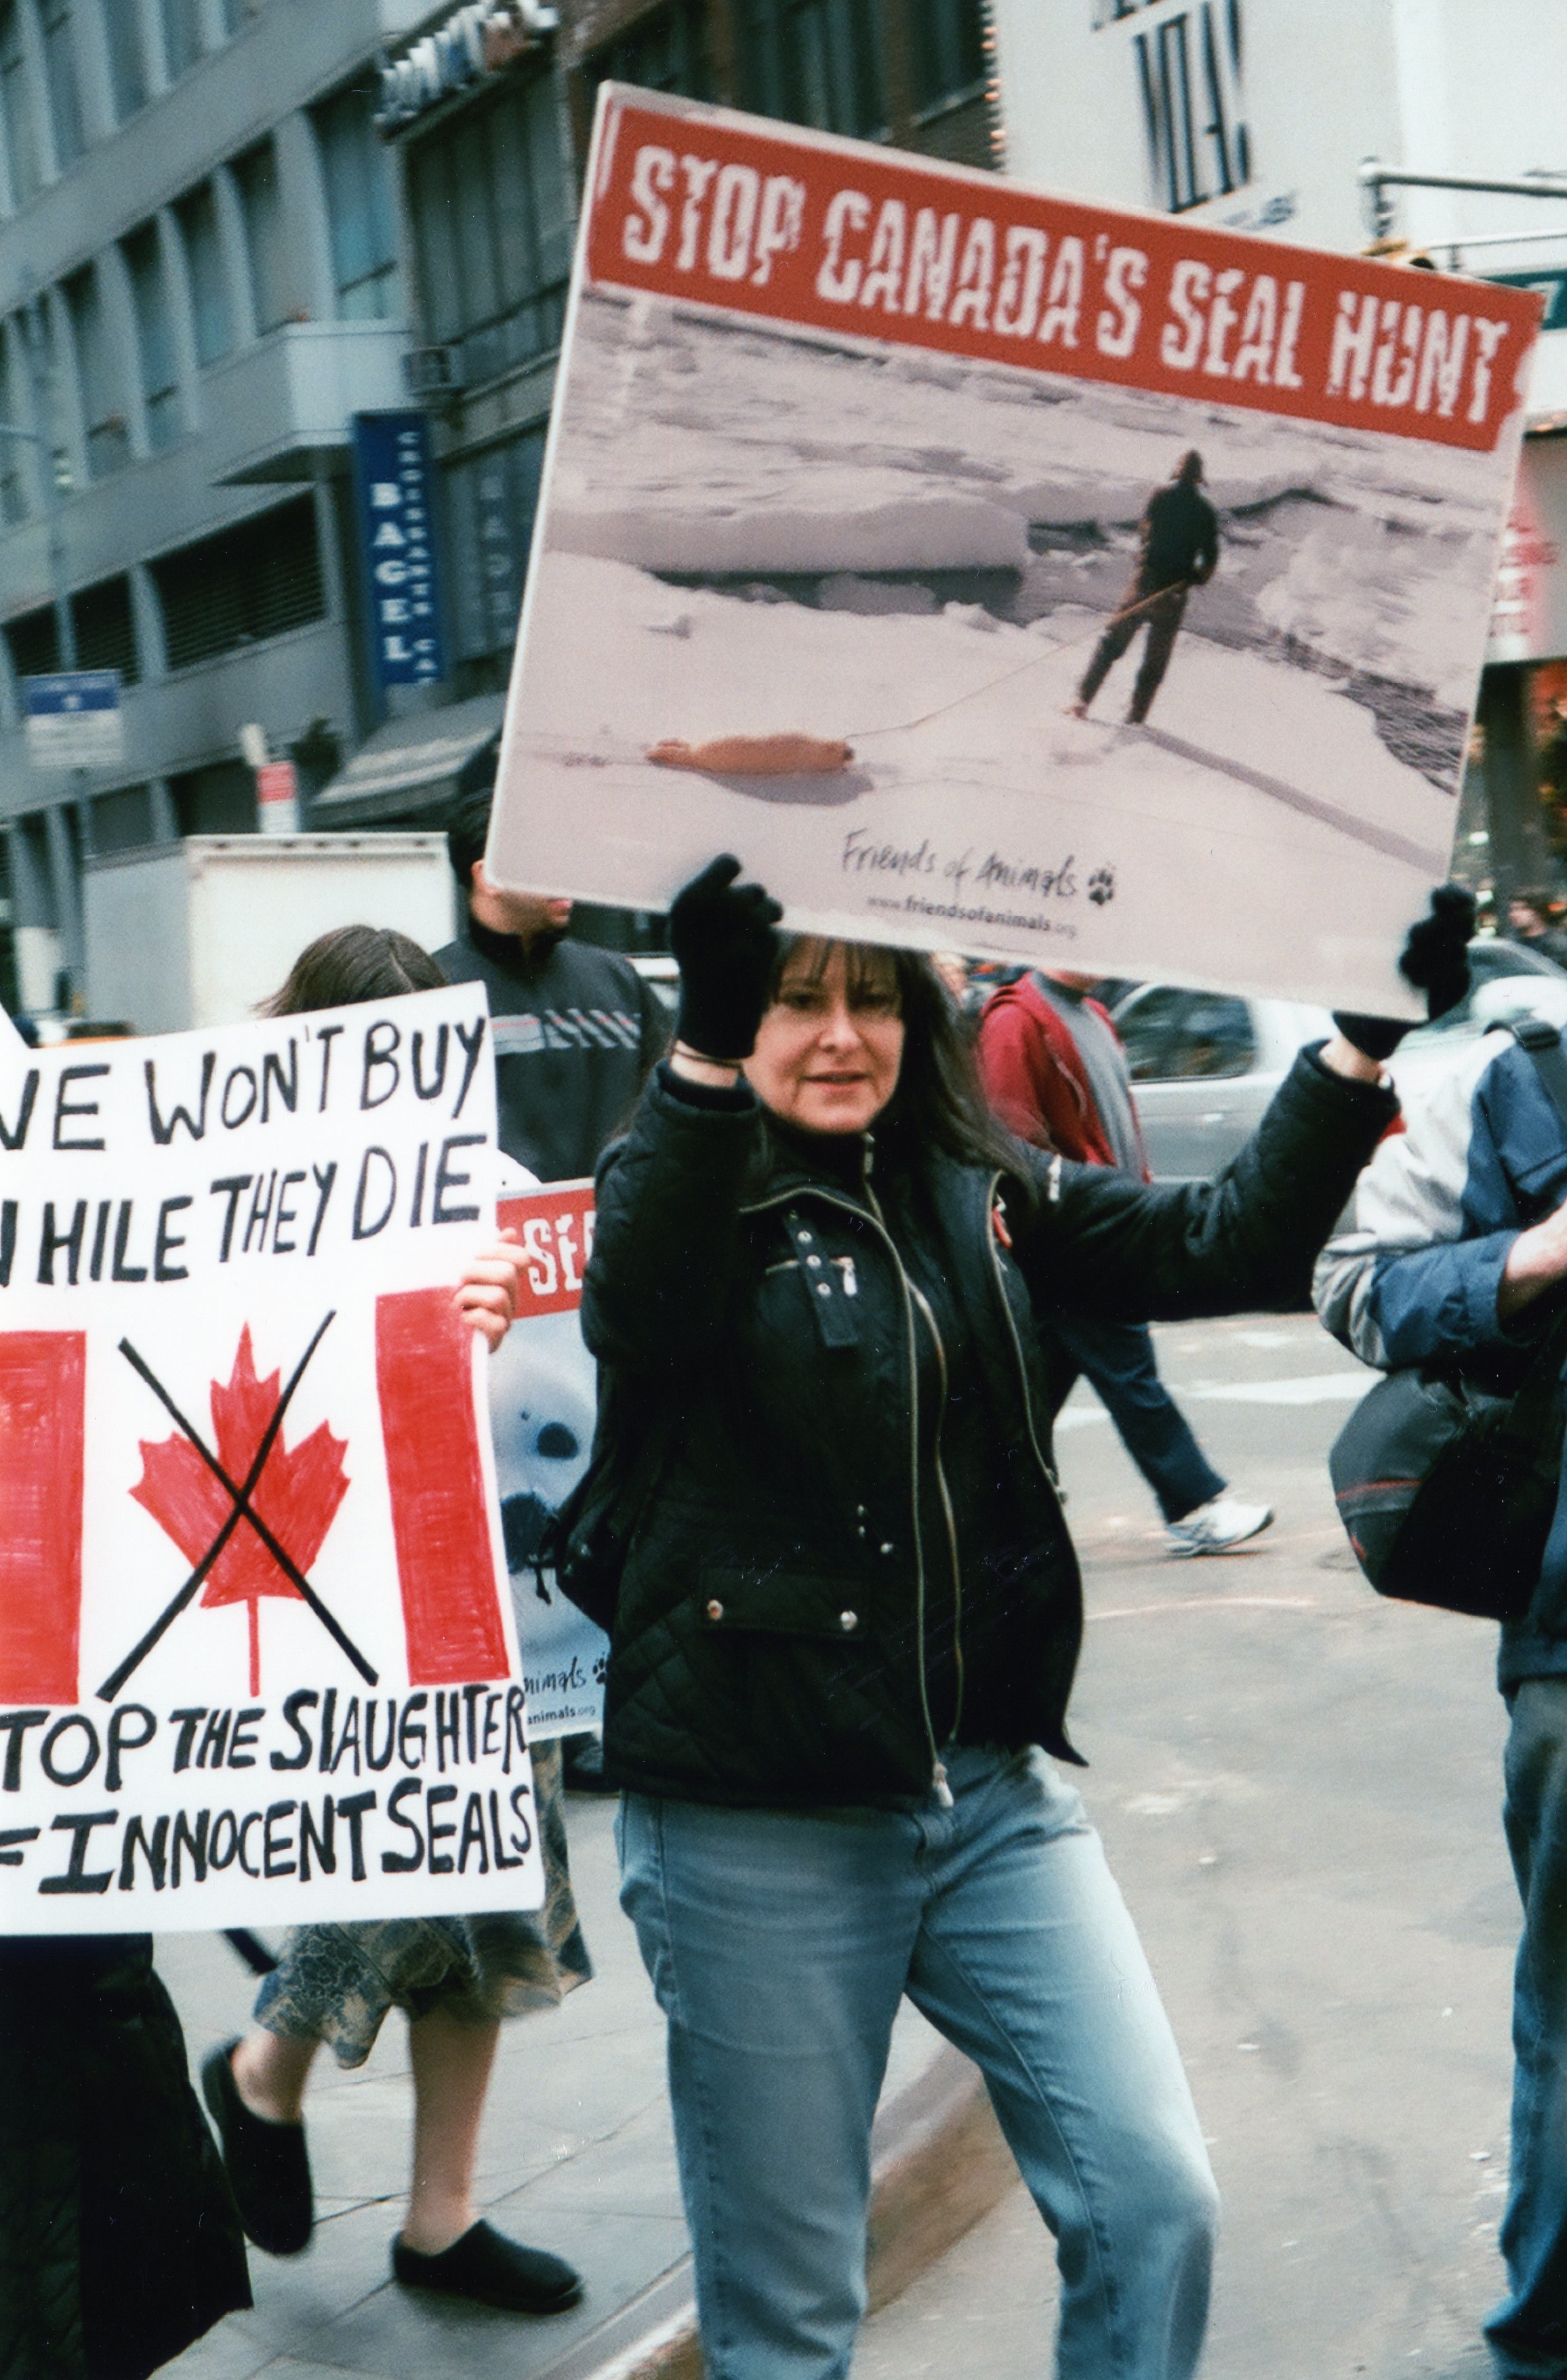 People march with signs protesting Canada's seal hunt.